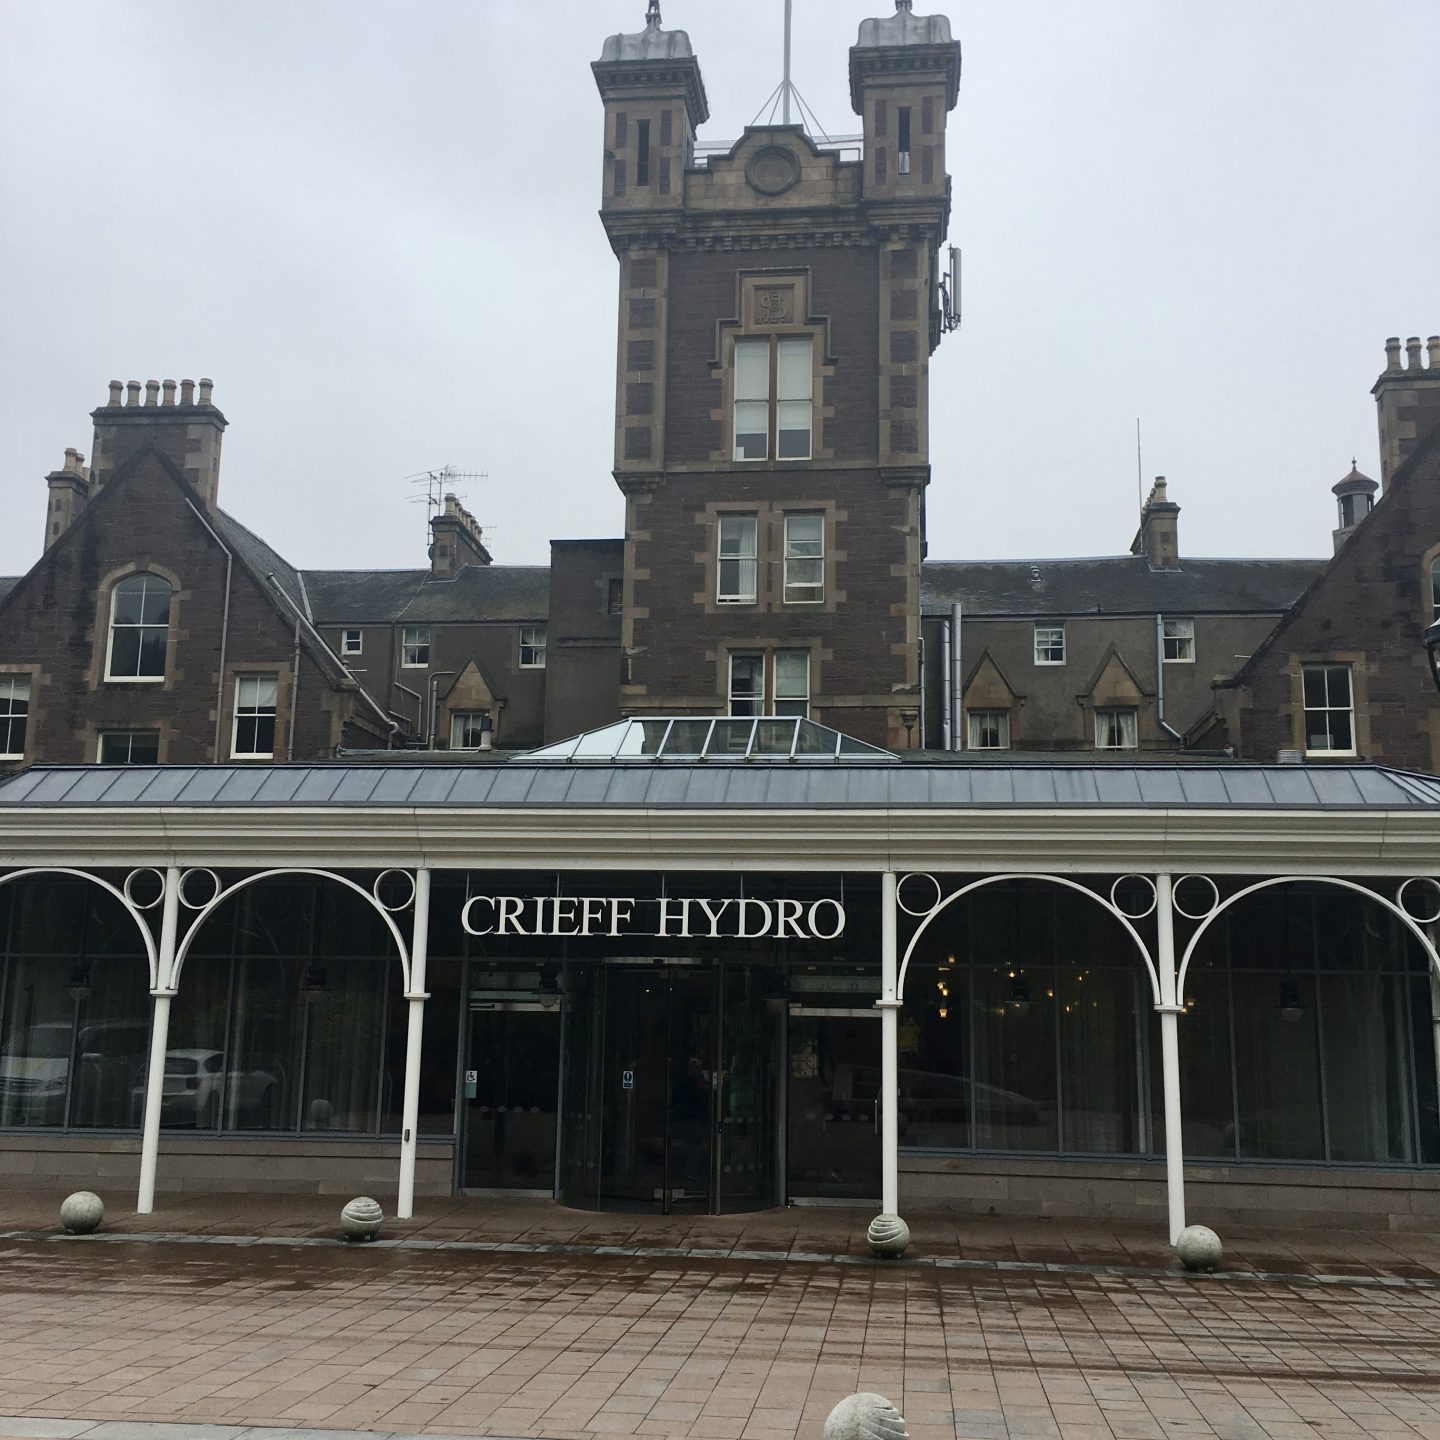 Crieff Hydro review - a mini break with kids under 6